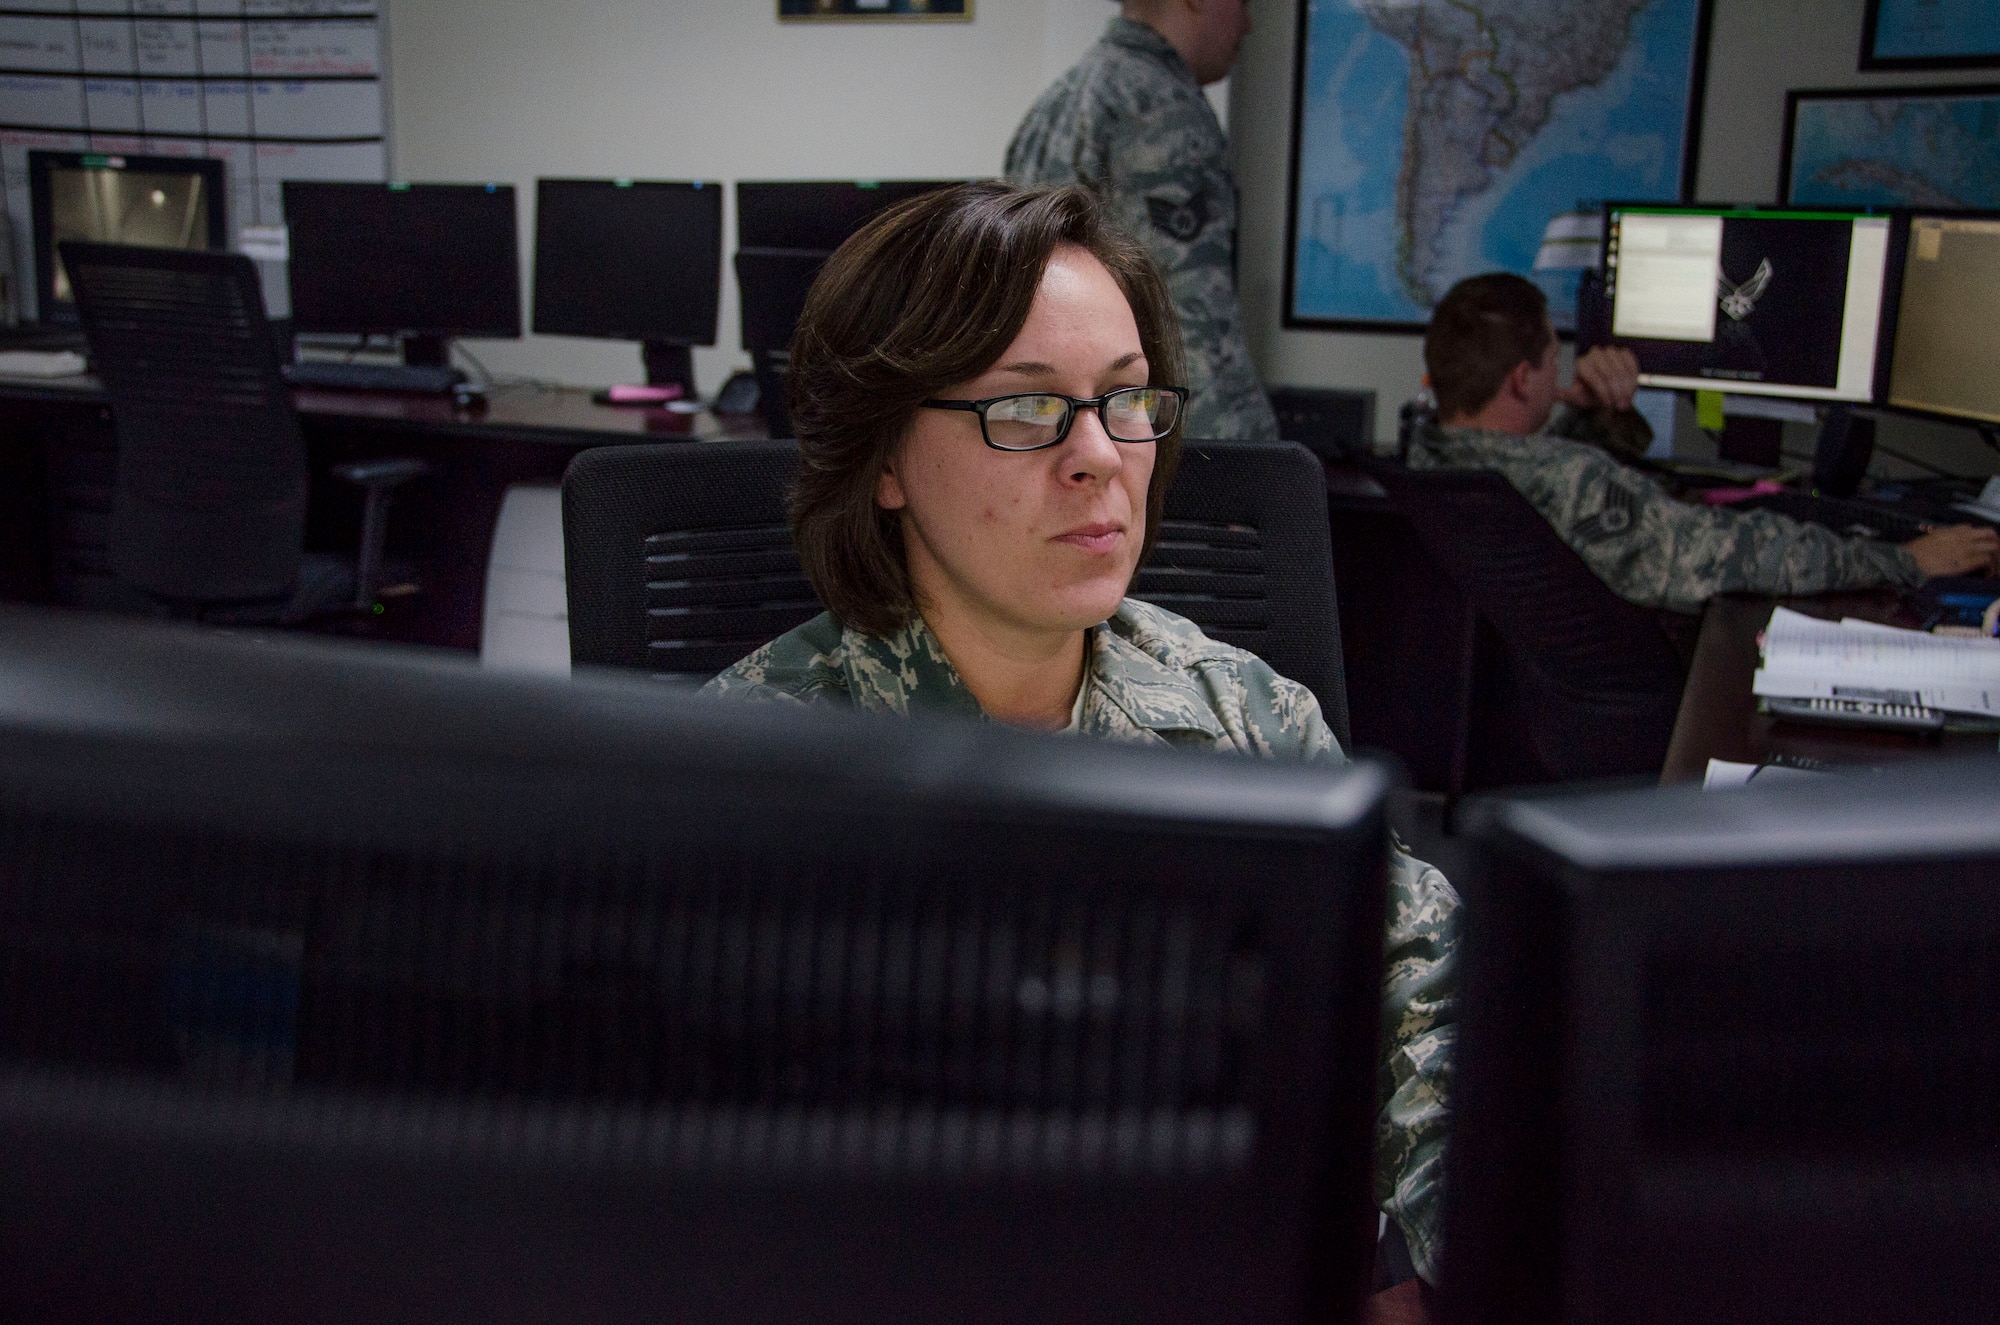 Staff Sgt. Toni Pierce, 612th Support Squadron Weather Forecaster, observes weather patterns at Davis-Monthan AFB, Ariz., Oct. 20, 2014. The weather forecasters of the 612th SPTS produce over 5,200 weather forecast products per month including, but not limited to, Flight Weather Mission Execution Forecasts, Terminal Aerodrome Forecasts and Graphical Depictions characterizing daily weather and flight hazards, as well as bulletin statements. (U.S. Air Force photo by Staff Sgt. Adam Grant/Released) 